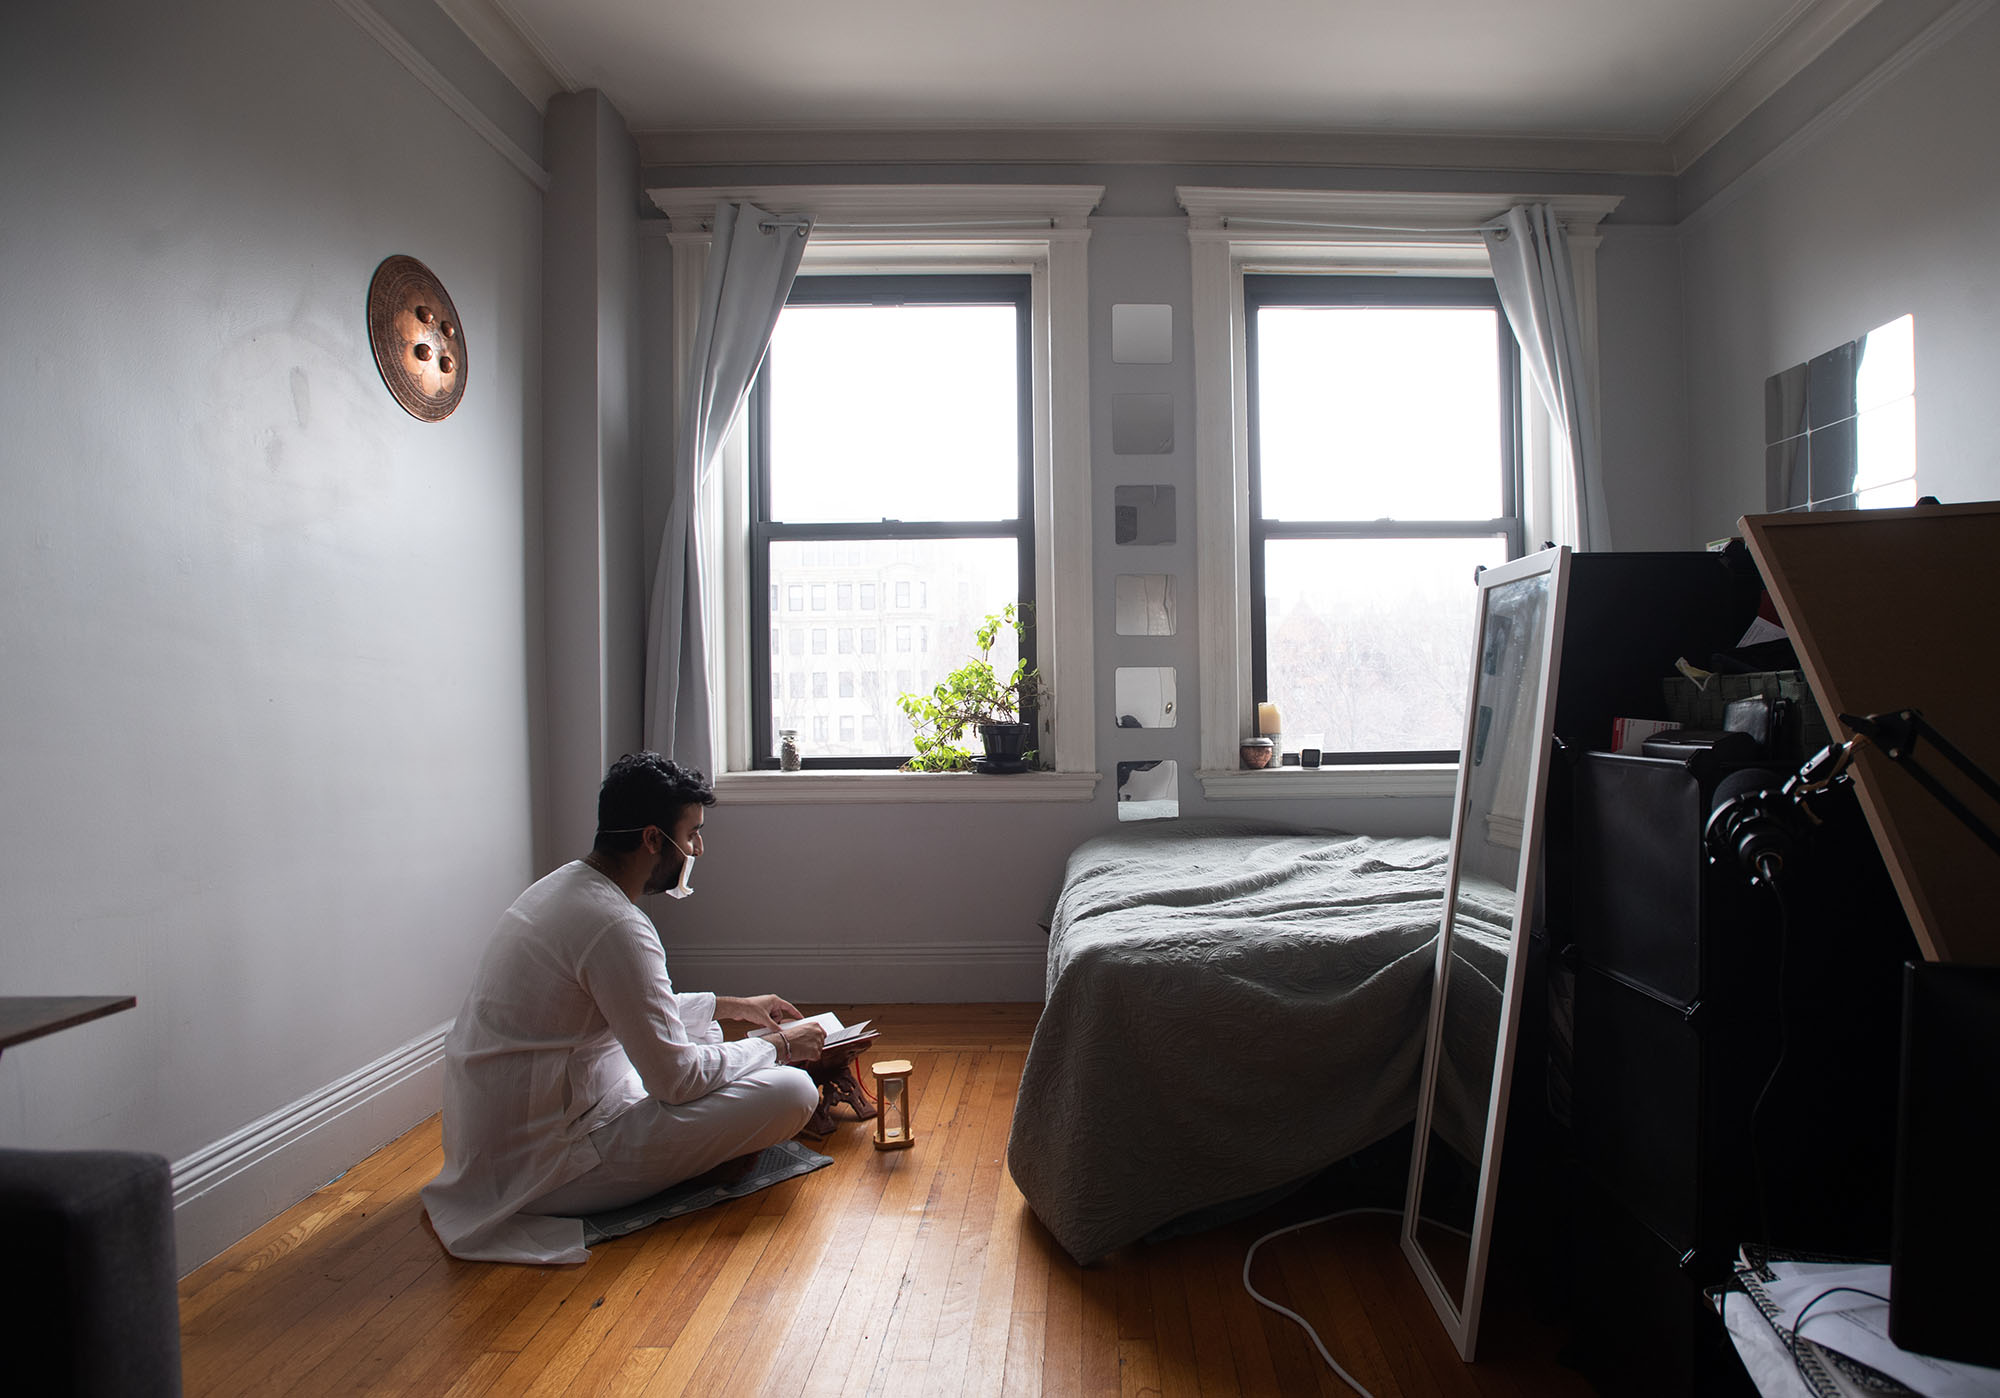 Photo of Adit Mehta, a tan man with black hair and beard, sitting cross-legged and wearing a white top and pants, on the floor in his room. He reads a book using the light from the window.